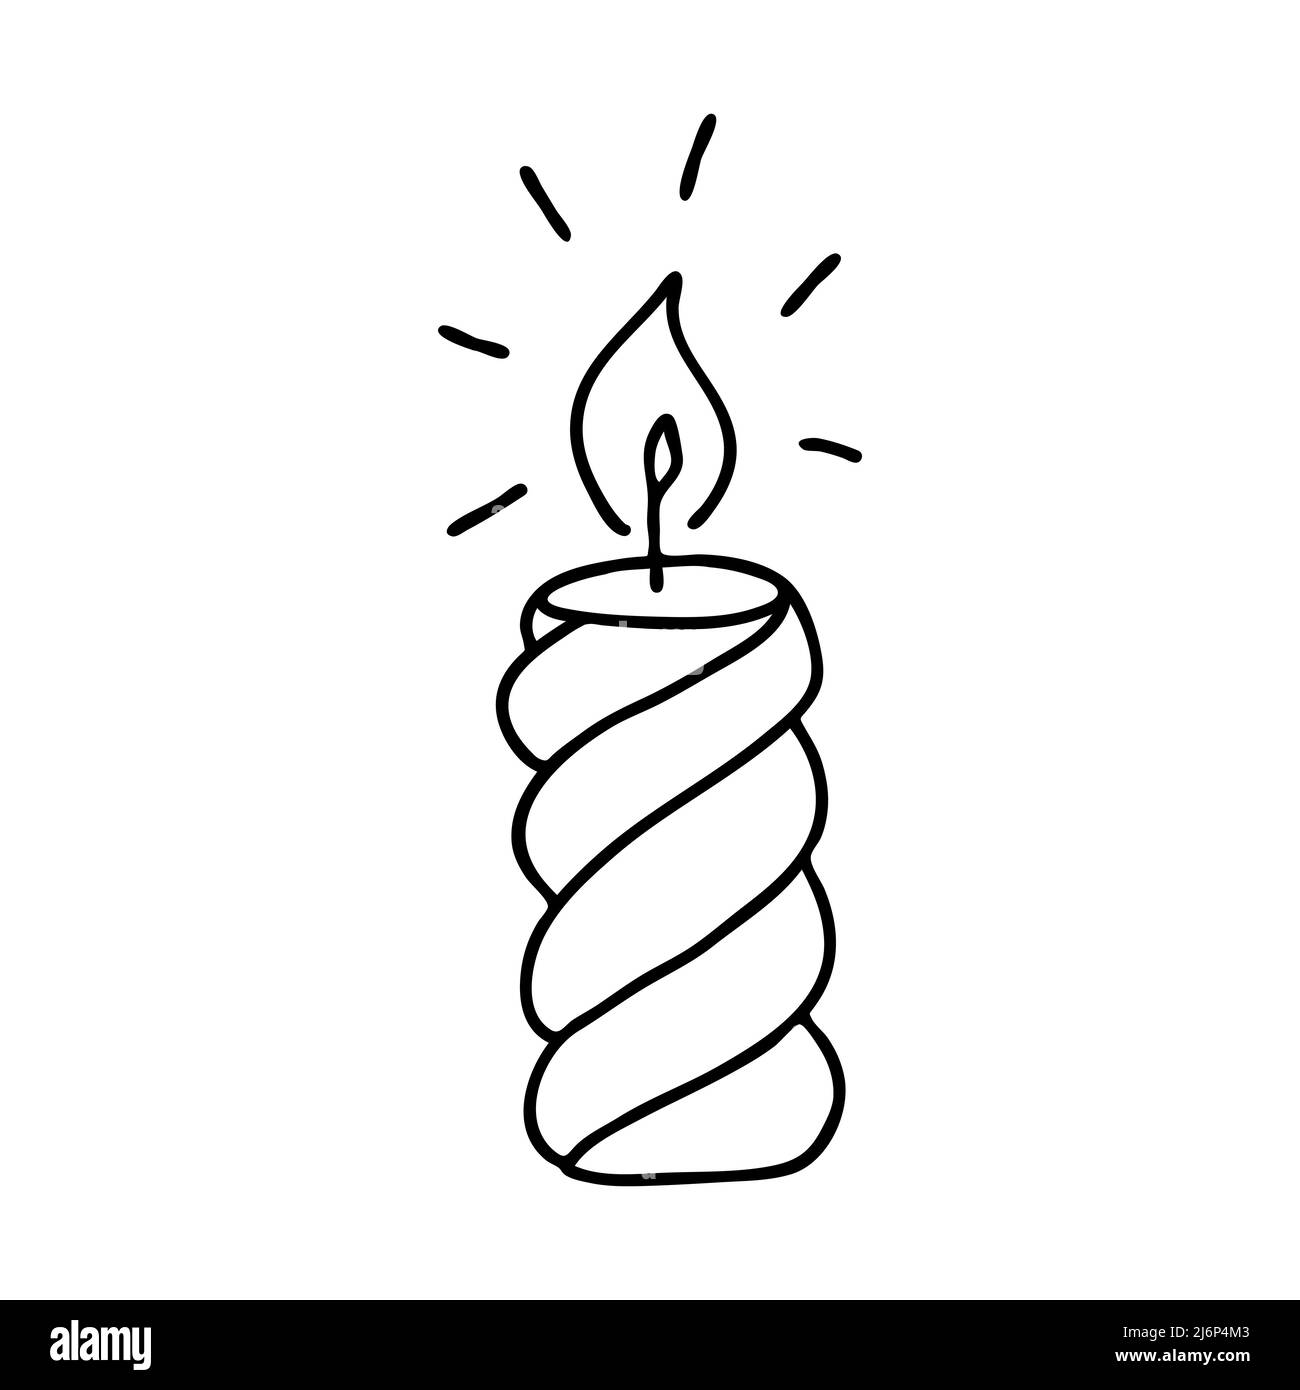 Download Candle, Drawing, Lamp. Royalty-Free Stock Illustration Image -  Pixabay